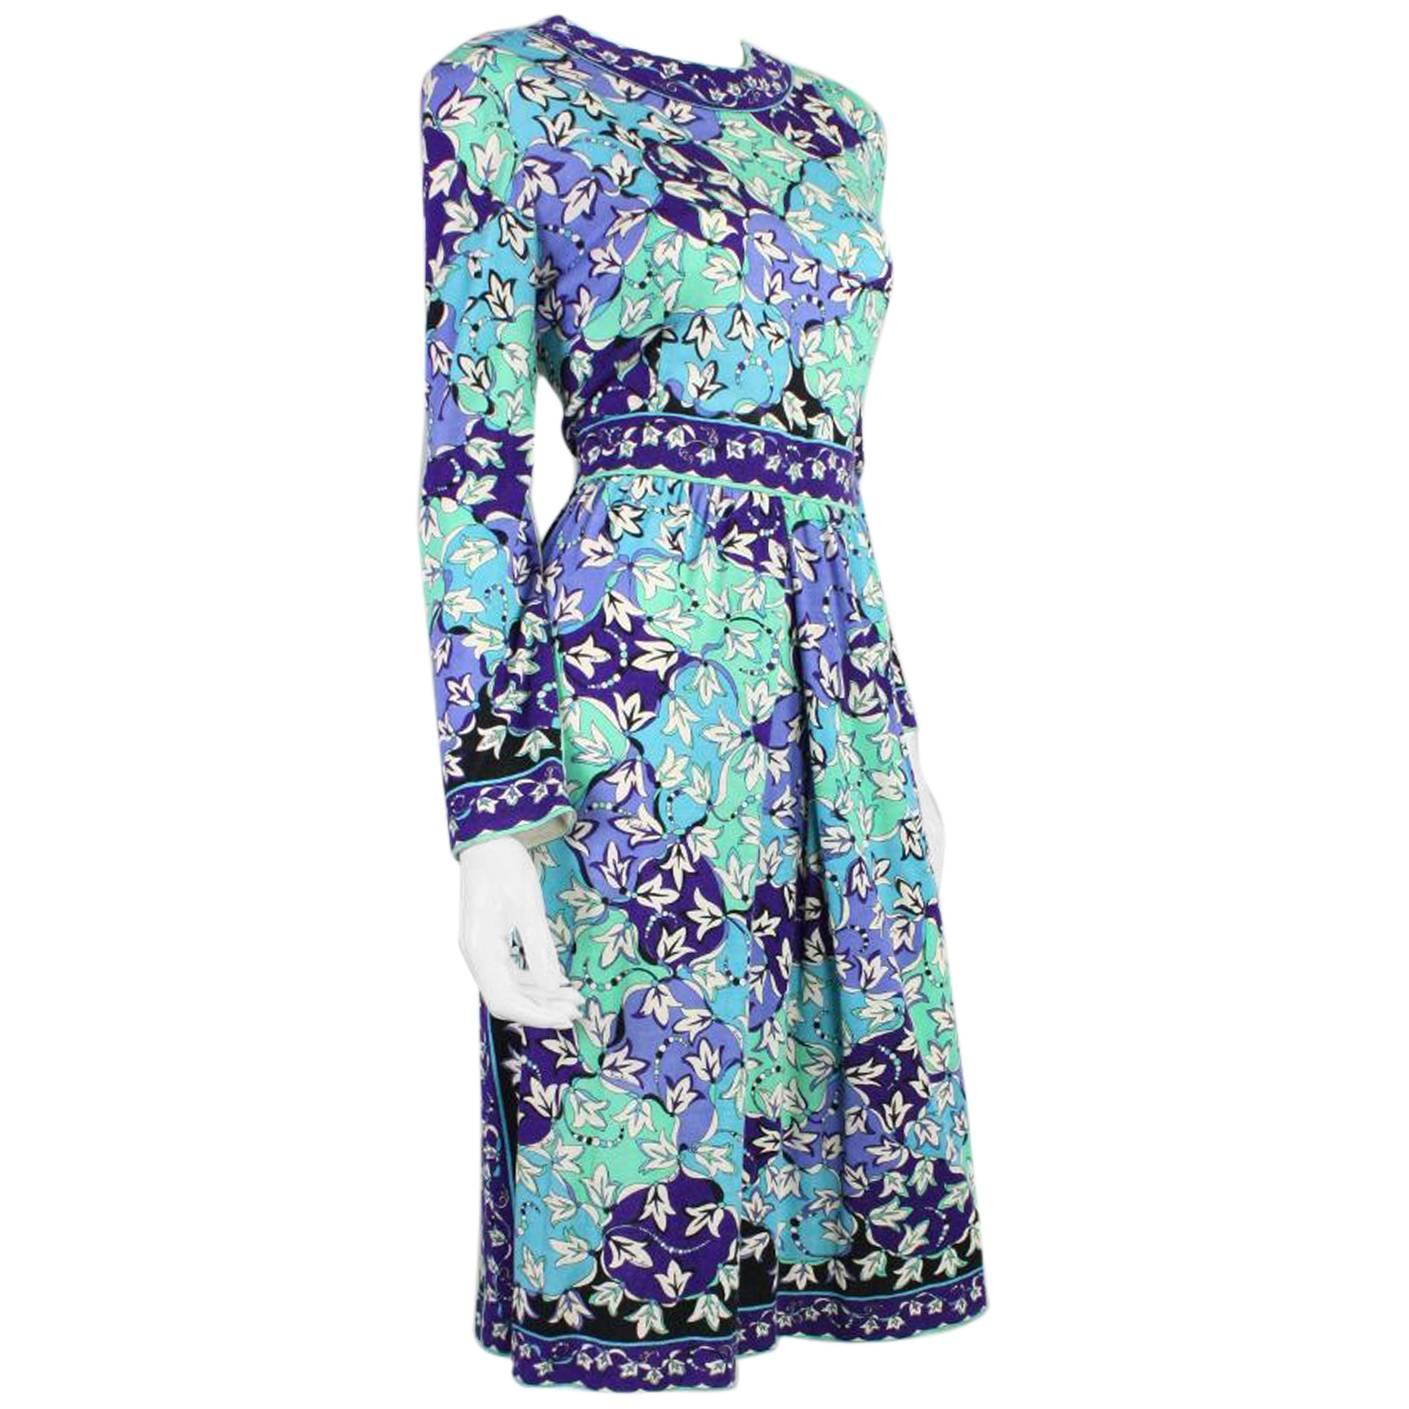 Vintage dress from Pucci dates to the 1970's and is made of floral printed cashmere blend.  Long sleeves with round neck. Center front inverted pleat in the skirt.  Unlined.  Center back zipper.

Labeled vintage size 14; please refer to